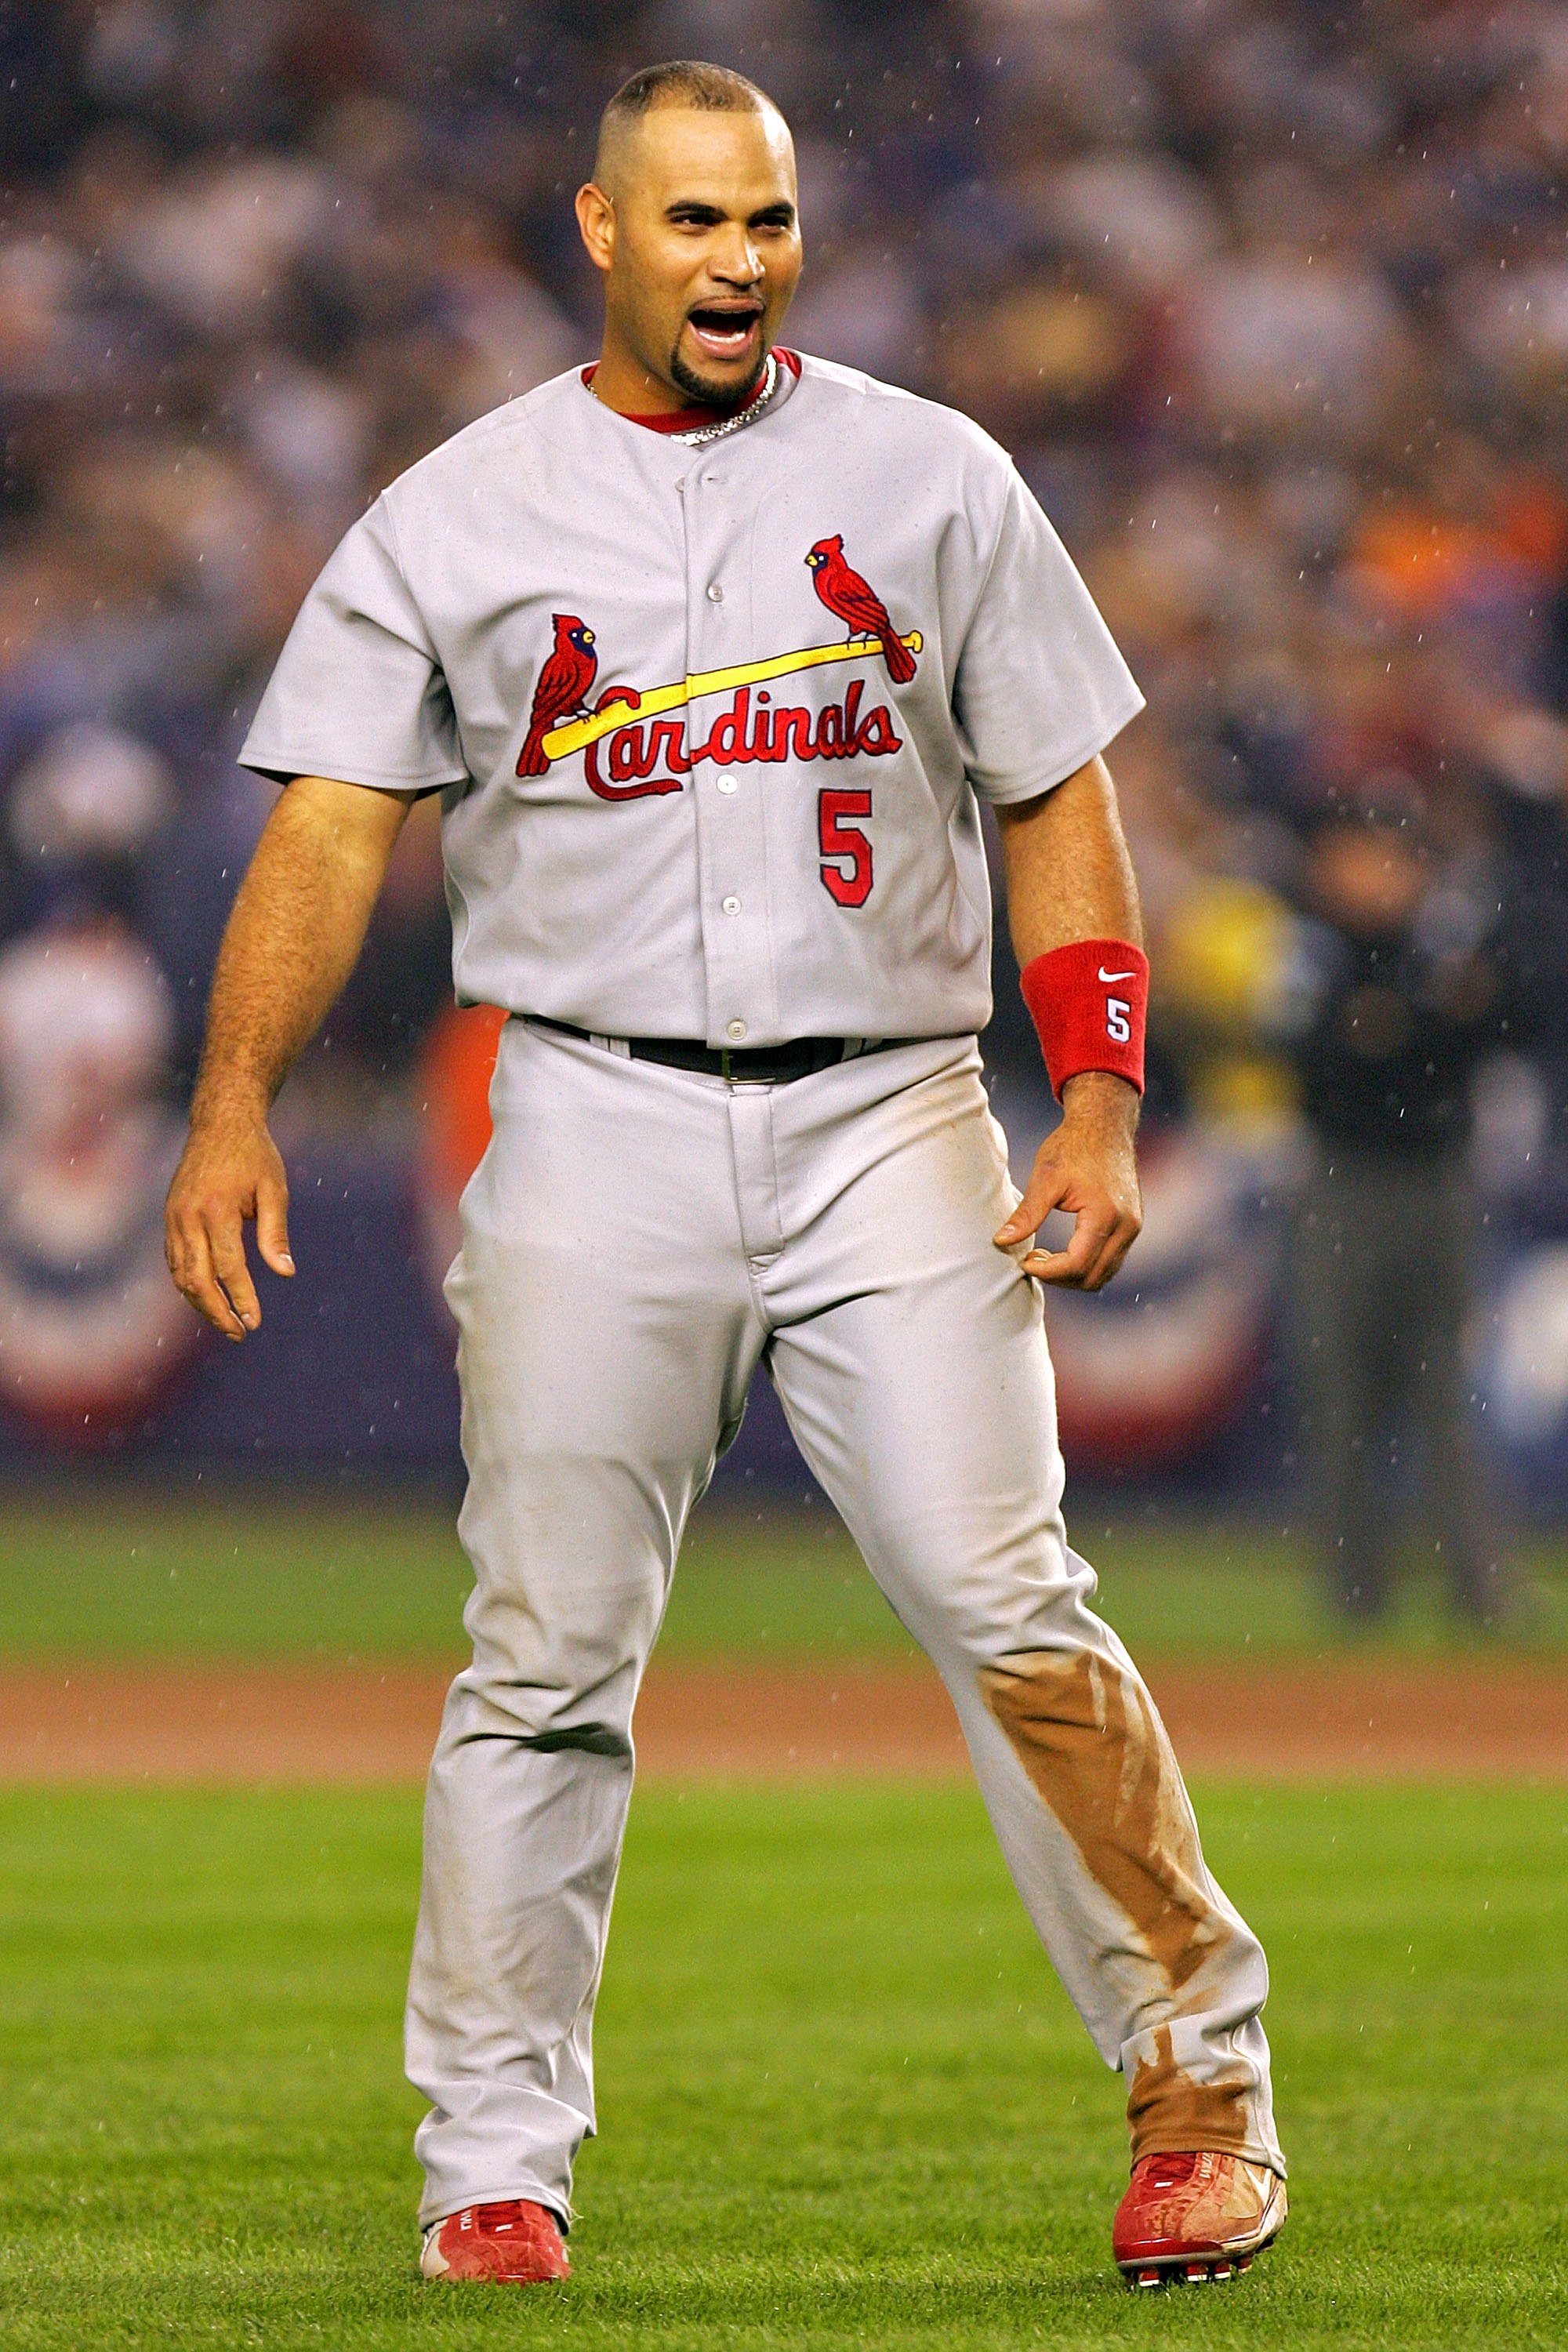 NEW YORK - OCTOBER 19:  Albert Pujols #5 of the St. Louis Cardinals reacts to flying out with the bases loaded to end the fifth inning against New York Mets during game seven of the NLCS at Shea Stadium on October 19, 2006 in the Flushing neighborhood of